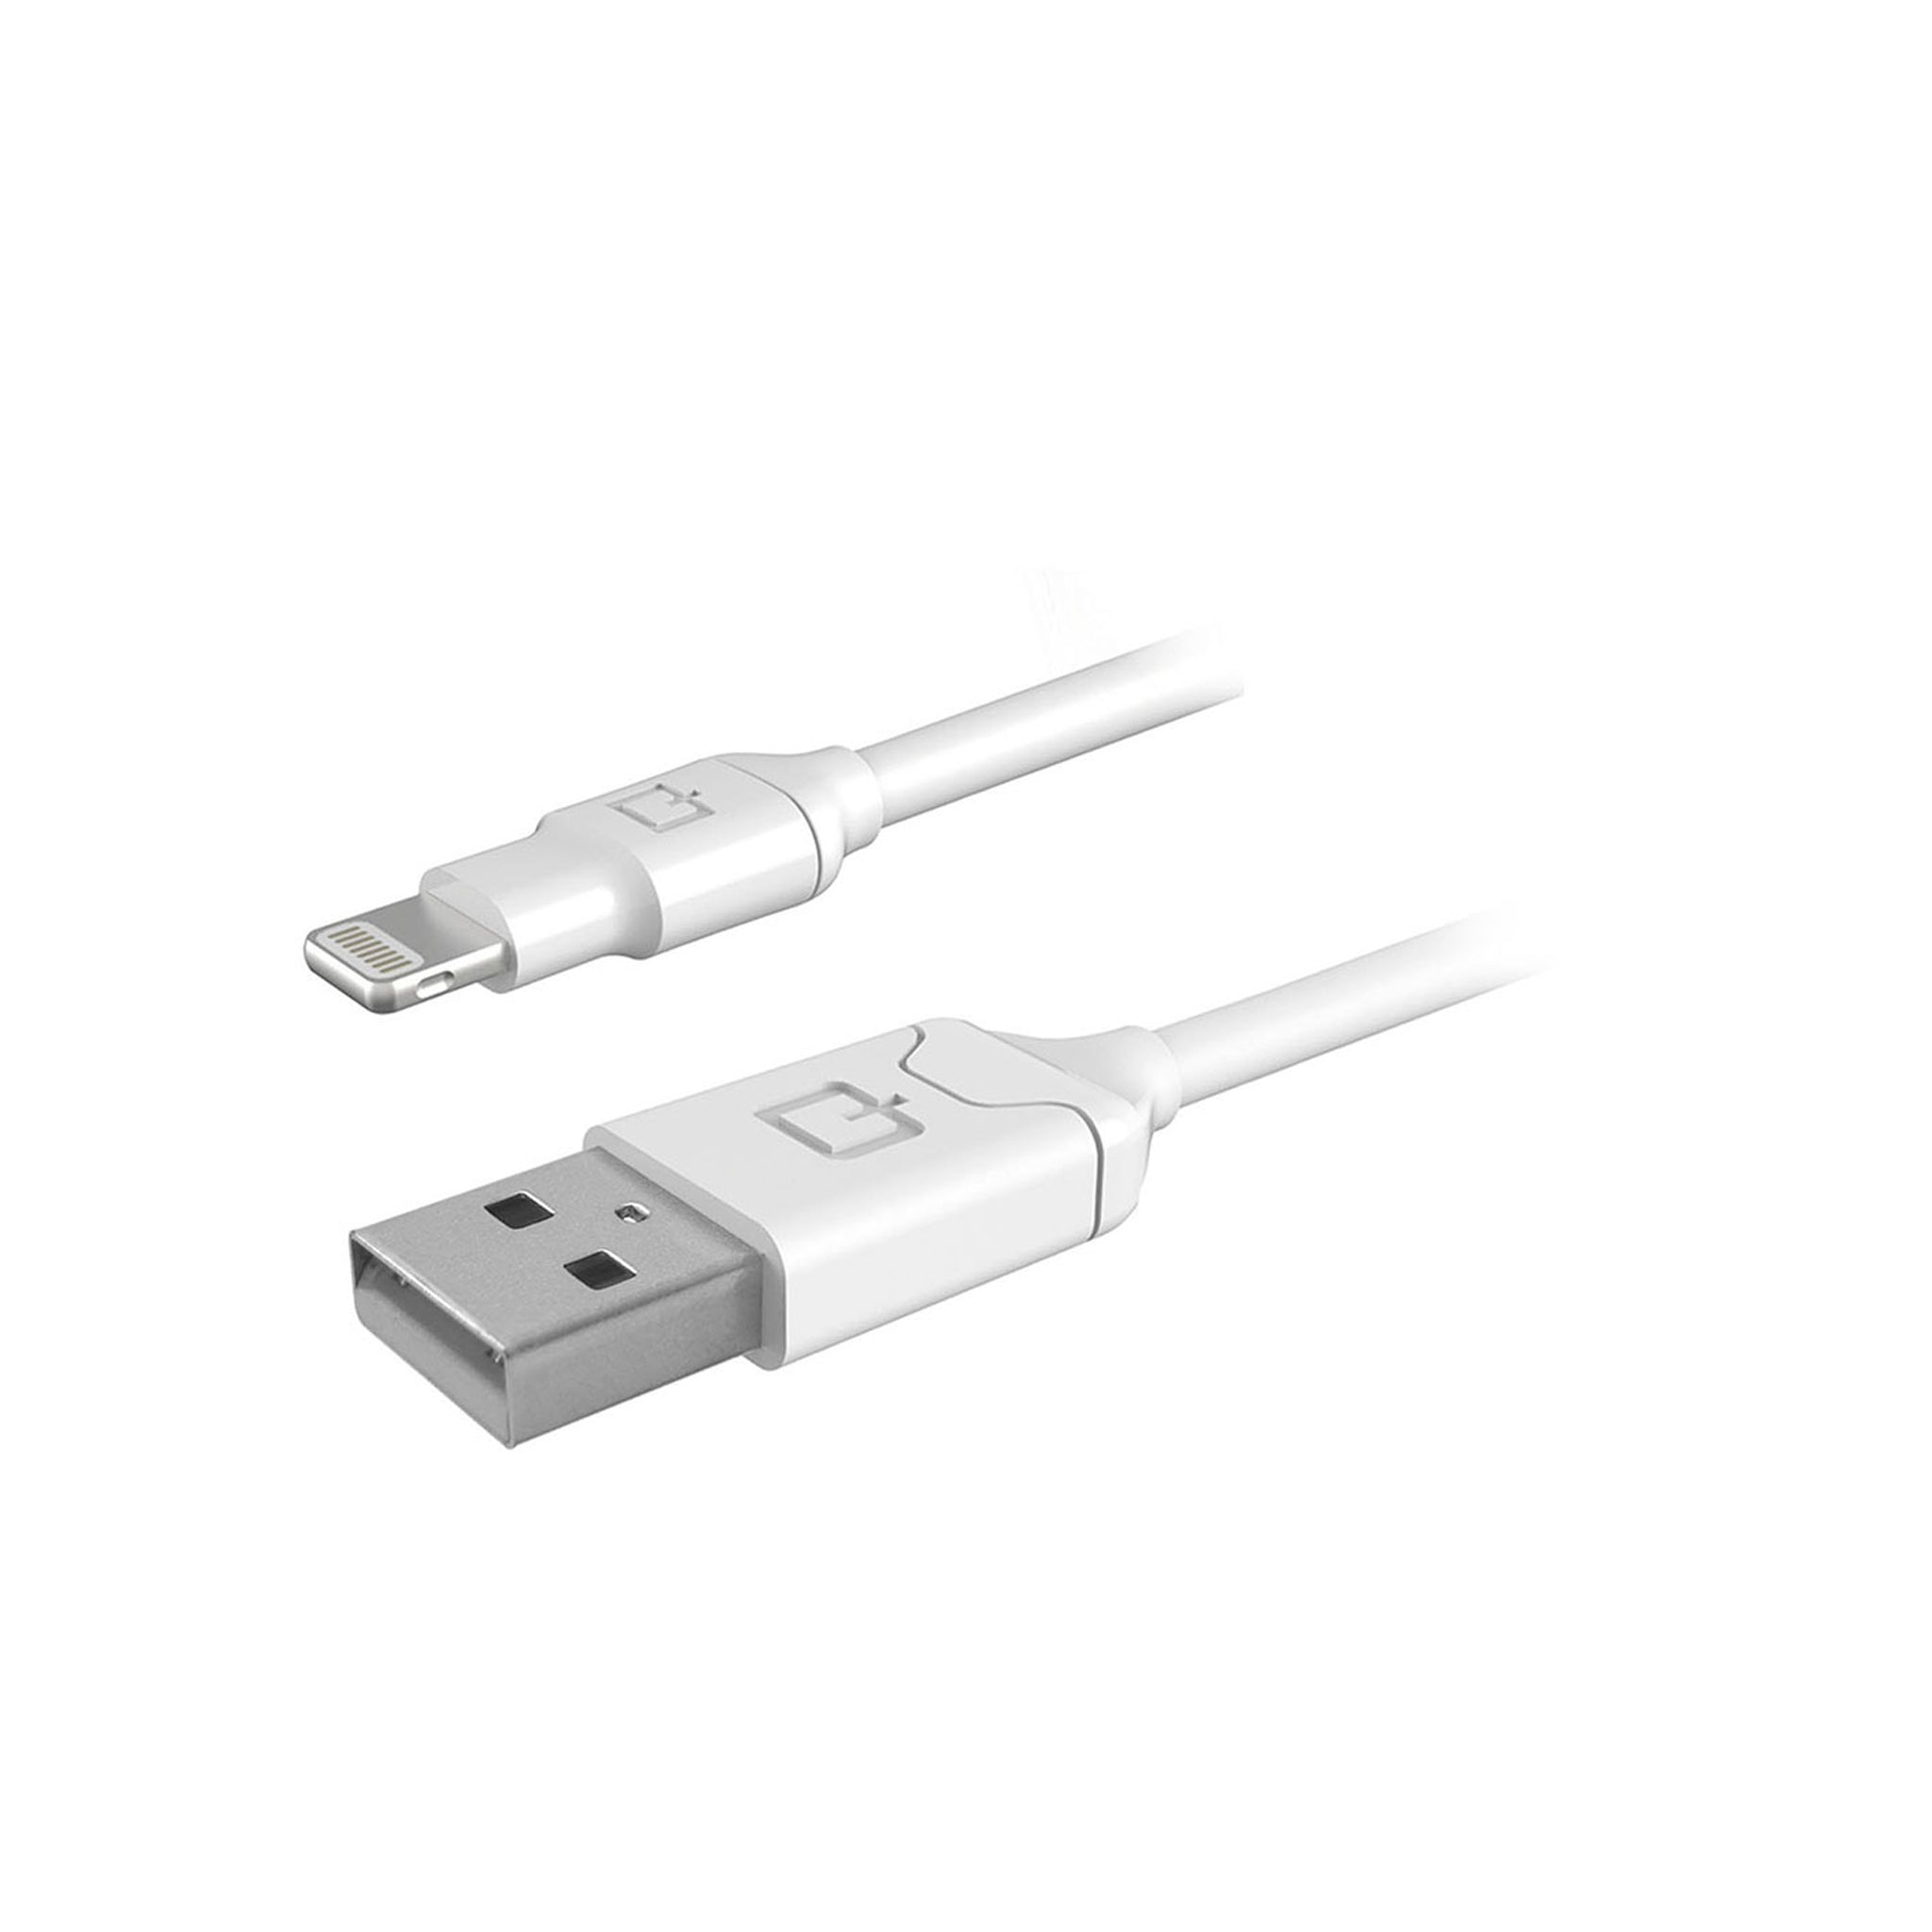 Qmadix - Apple Lightning Cable 10ft - White